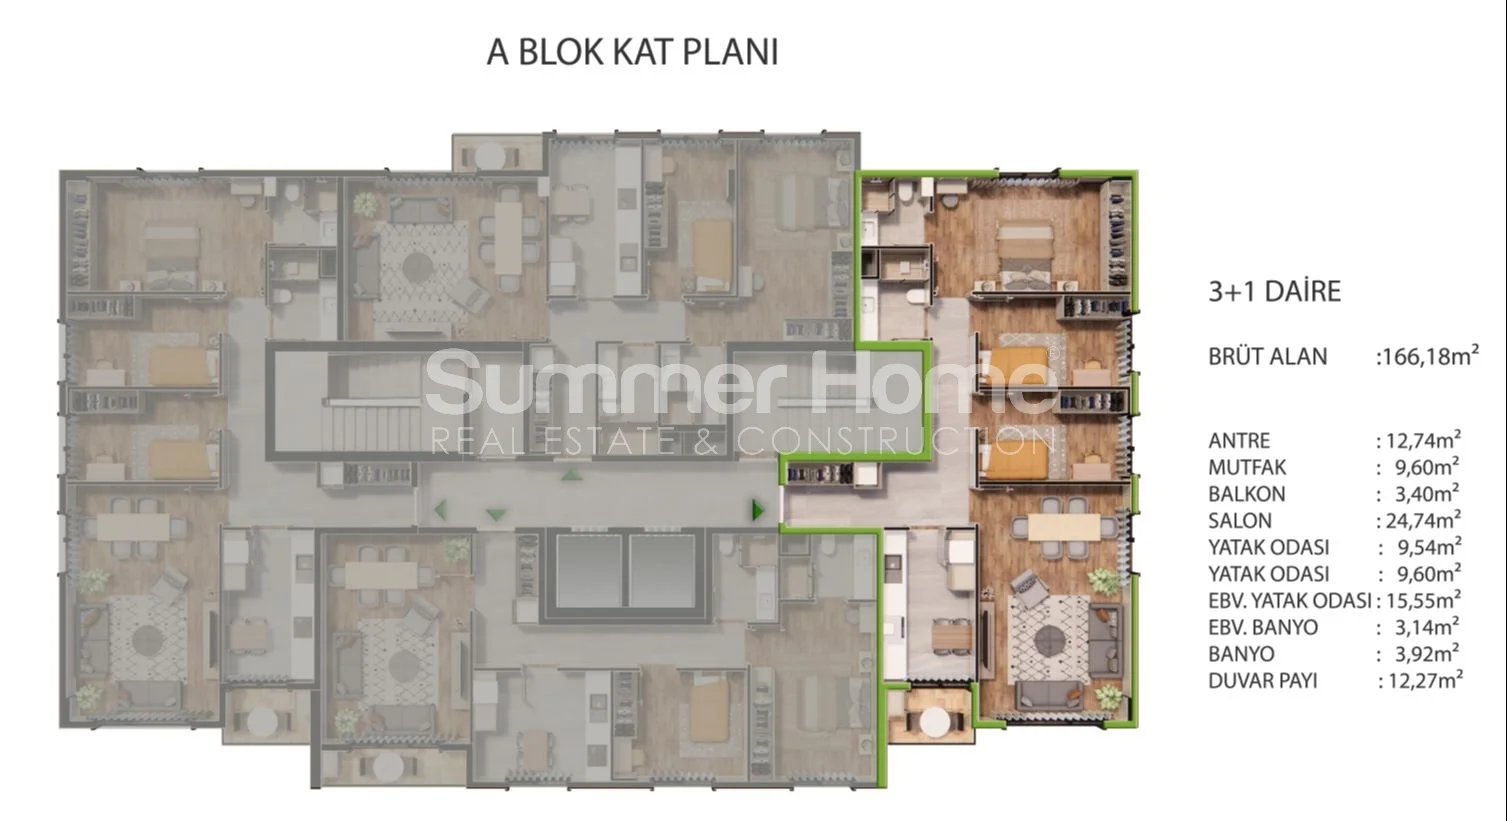 Beautiful apartments located in Kartal district of Istanbul  Plan - 25